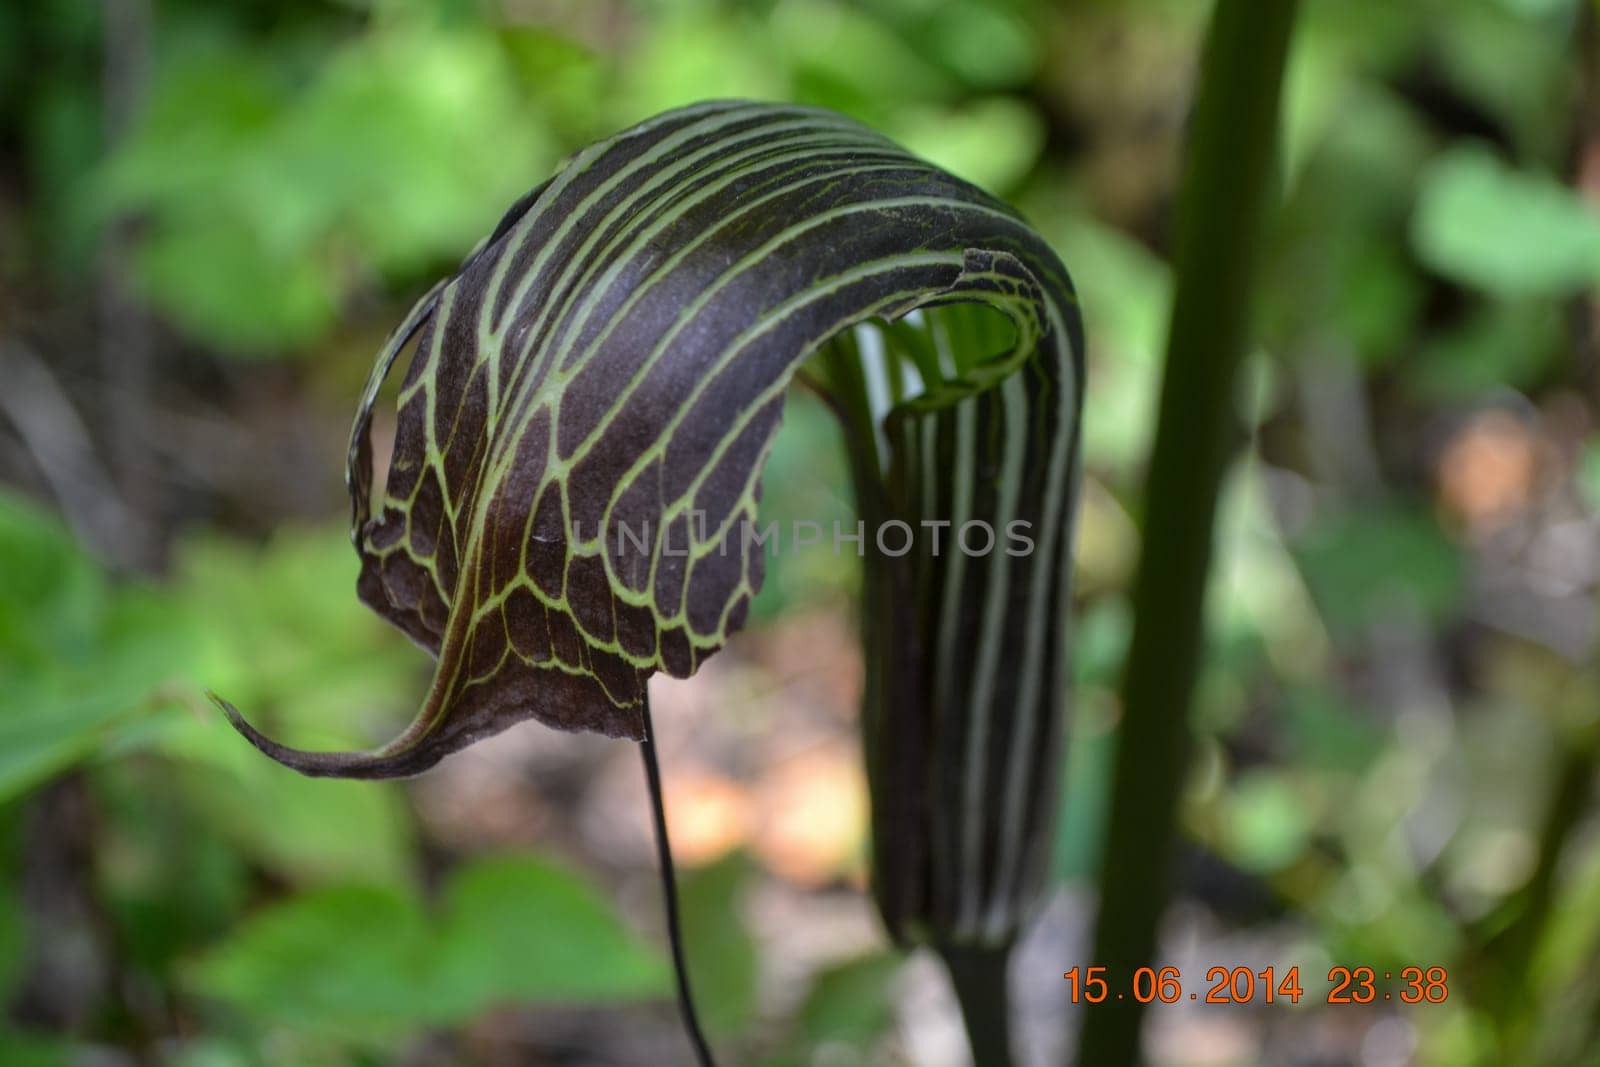 Cobra Lily, pitcher plant also called Darlingtonia californica in Himalaya. This plant is a species of carnivorous plant. As a pitcher plant it is the sole member of the genus Darlingtonia in the family Sarraceniaceae.